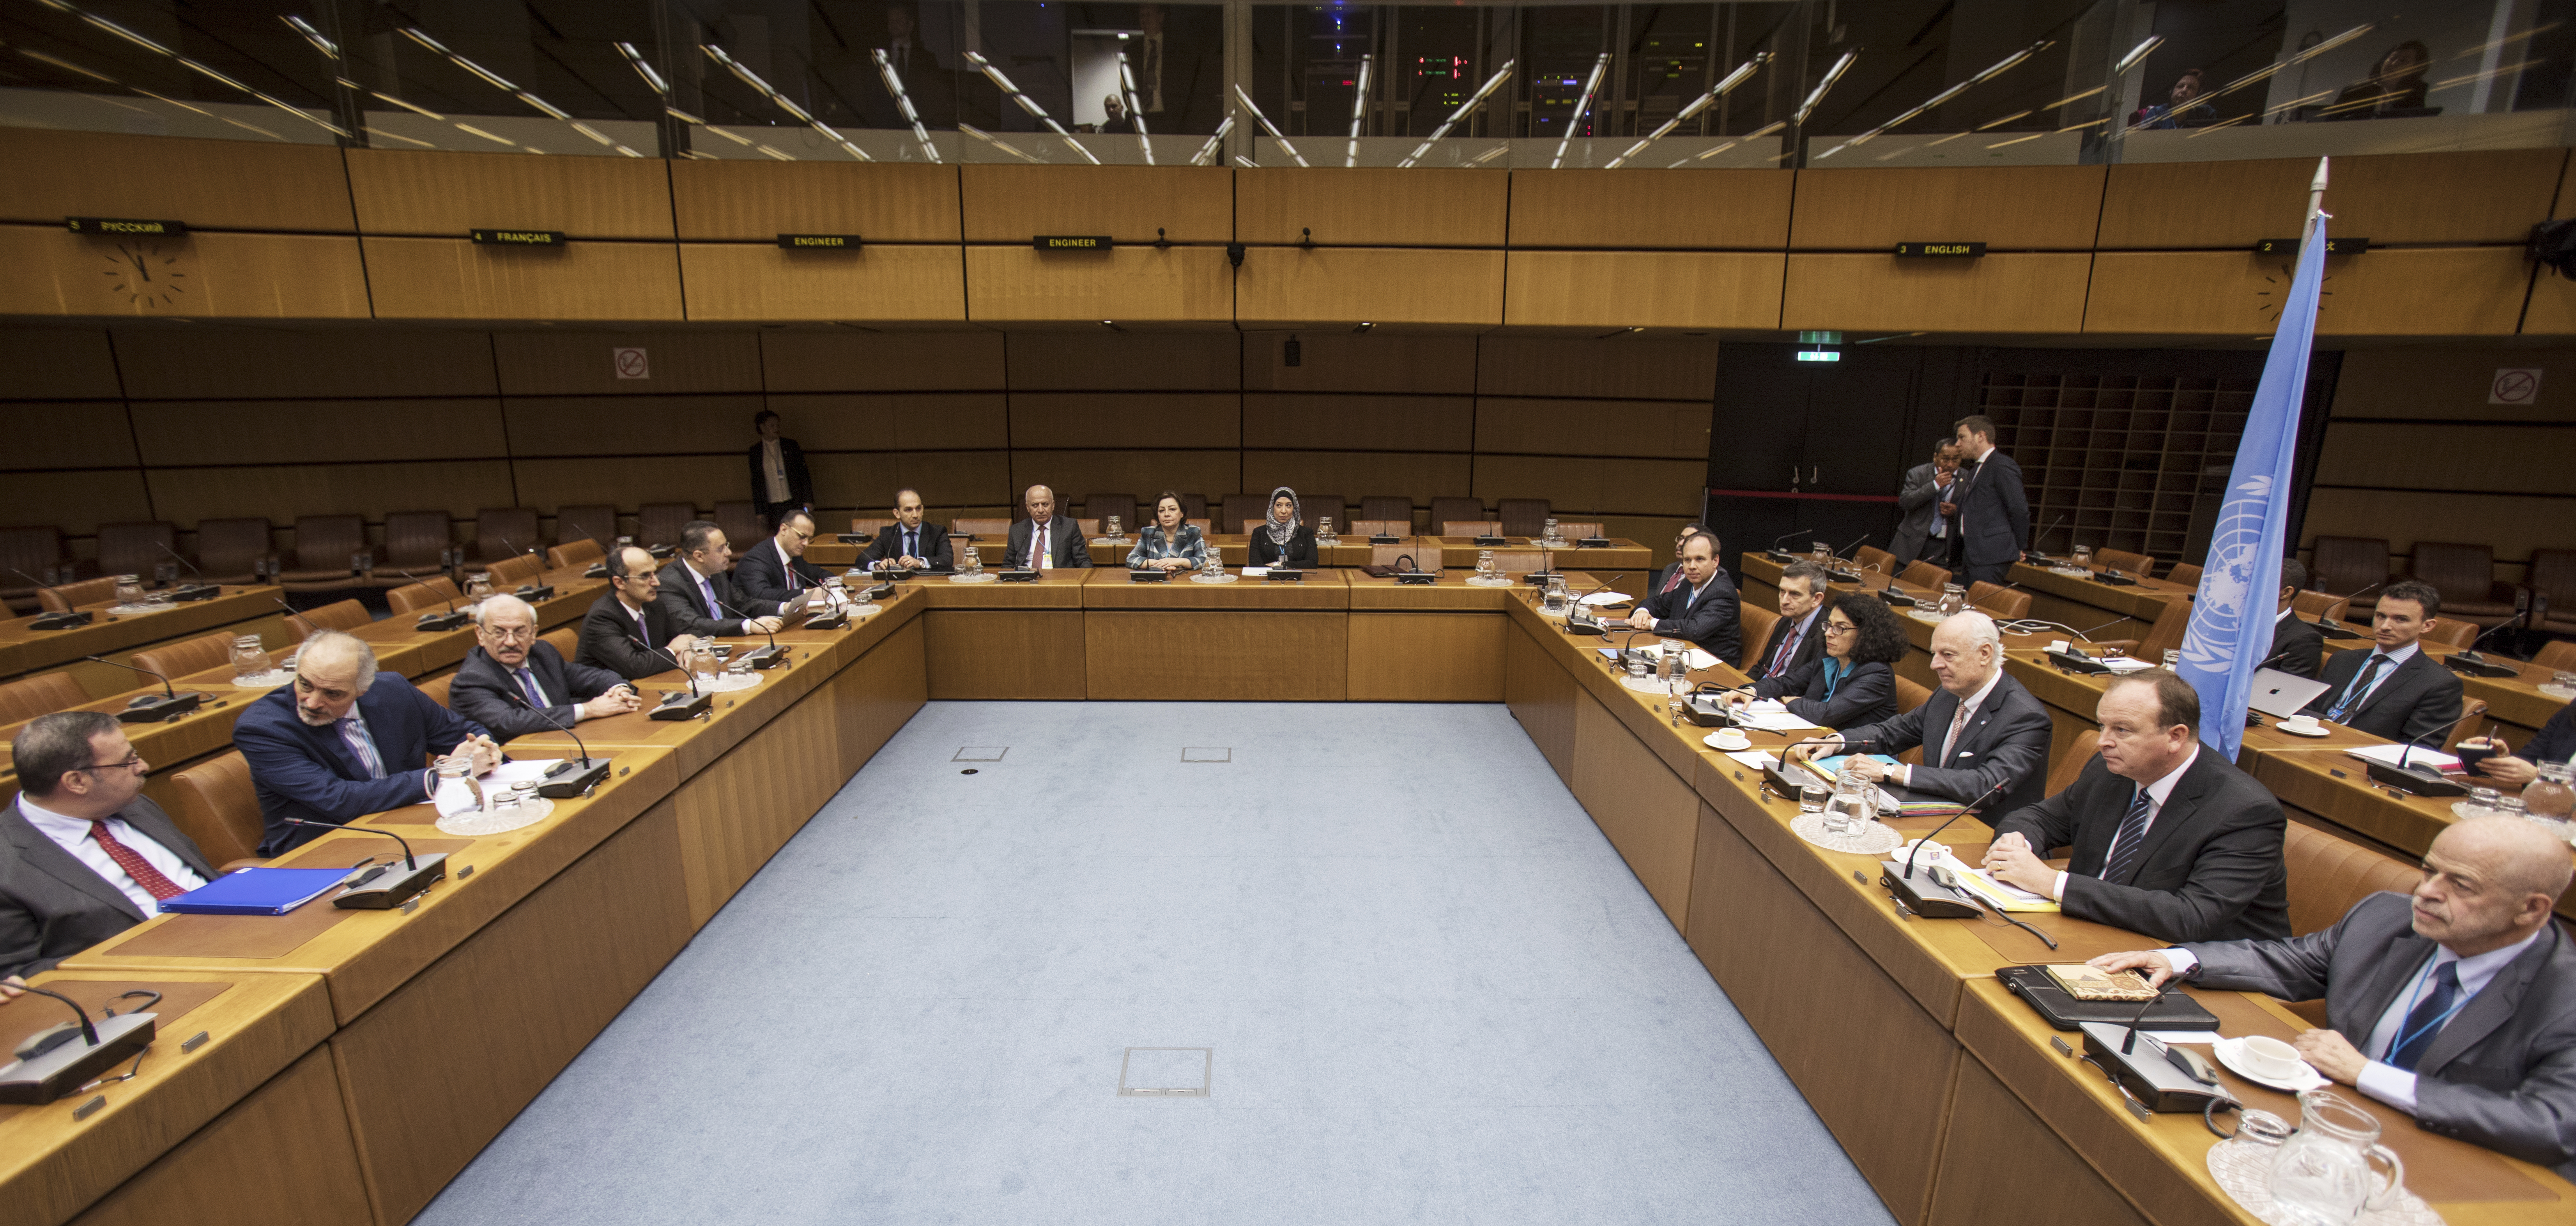 UN envoy Staffan de Mistura, third right, and Syrian chief negotiator and Ambassador of the Permanent Representative Mission of Syria to the United Nations Bashar al-Jaafari, second left, sit with other delegate members ahead of the start of official talks on Syria, in Vienna (Alex Halada/pool via AP)